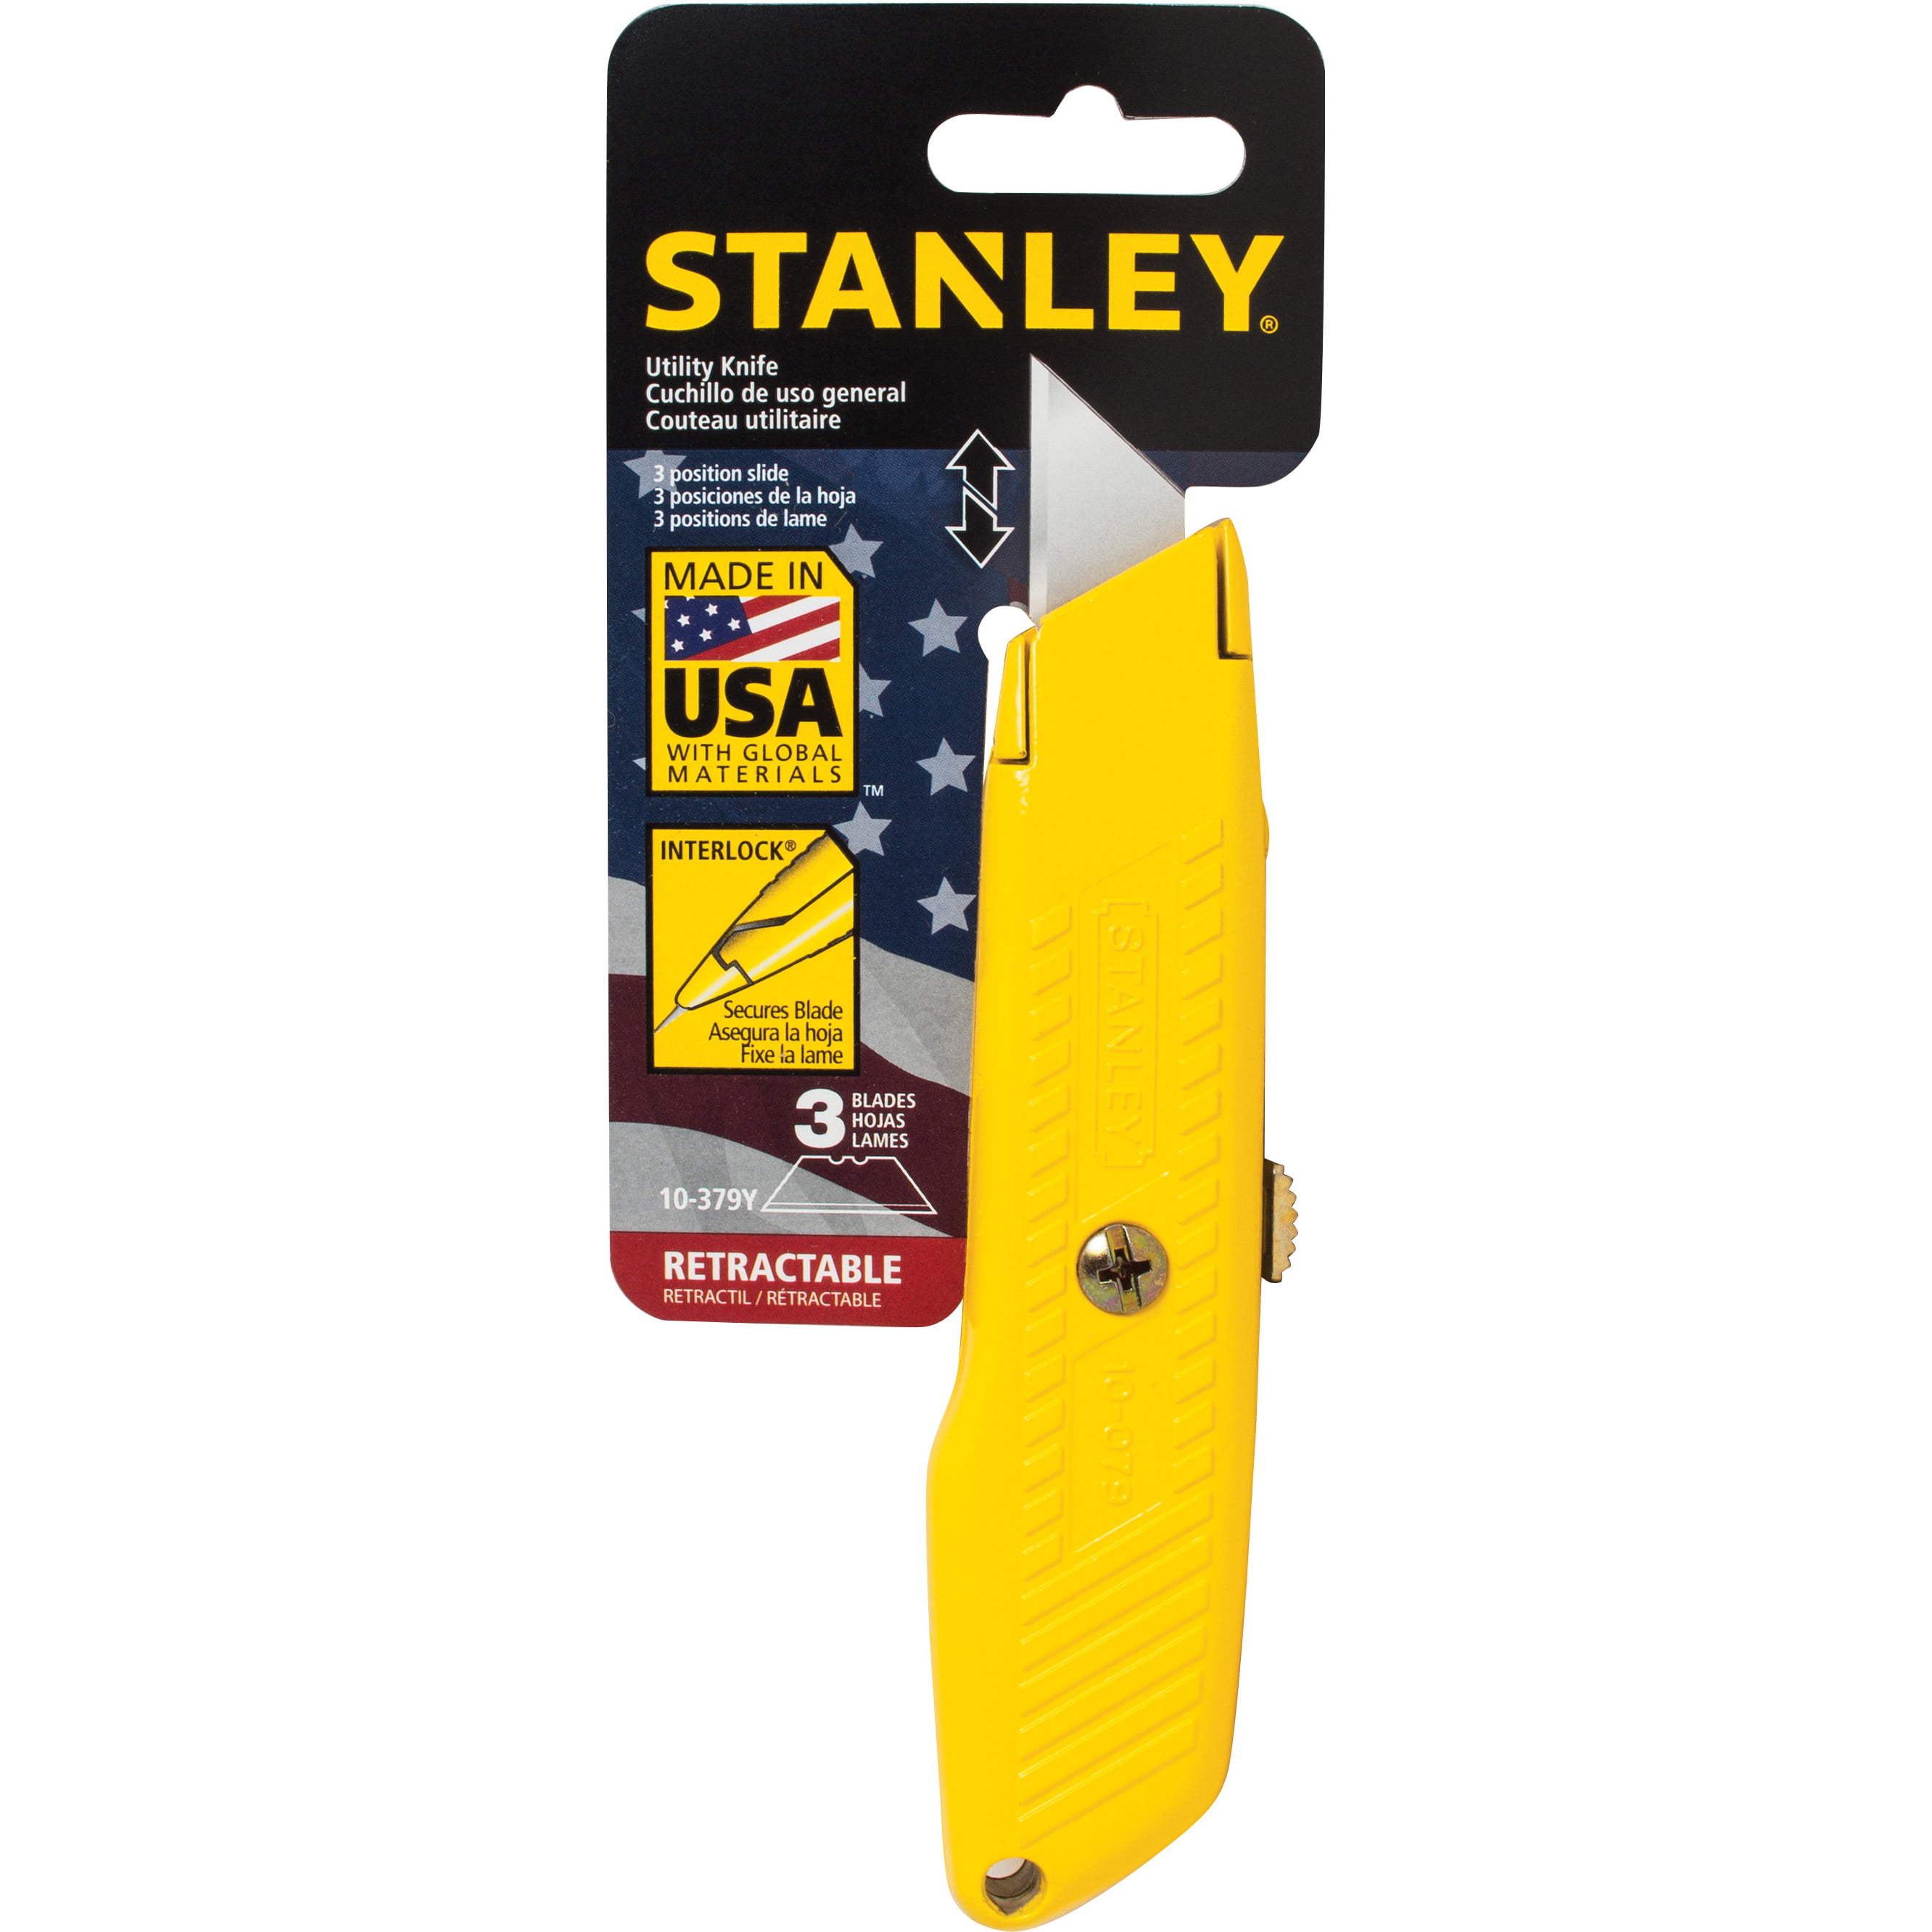 931360-3 Stanley Multipurpose Safety Knife; 6 x 1/2, Yellow